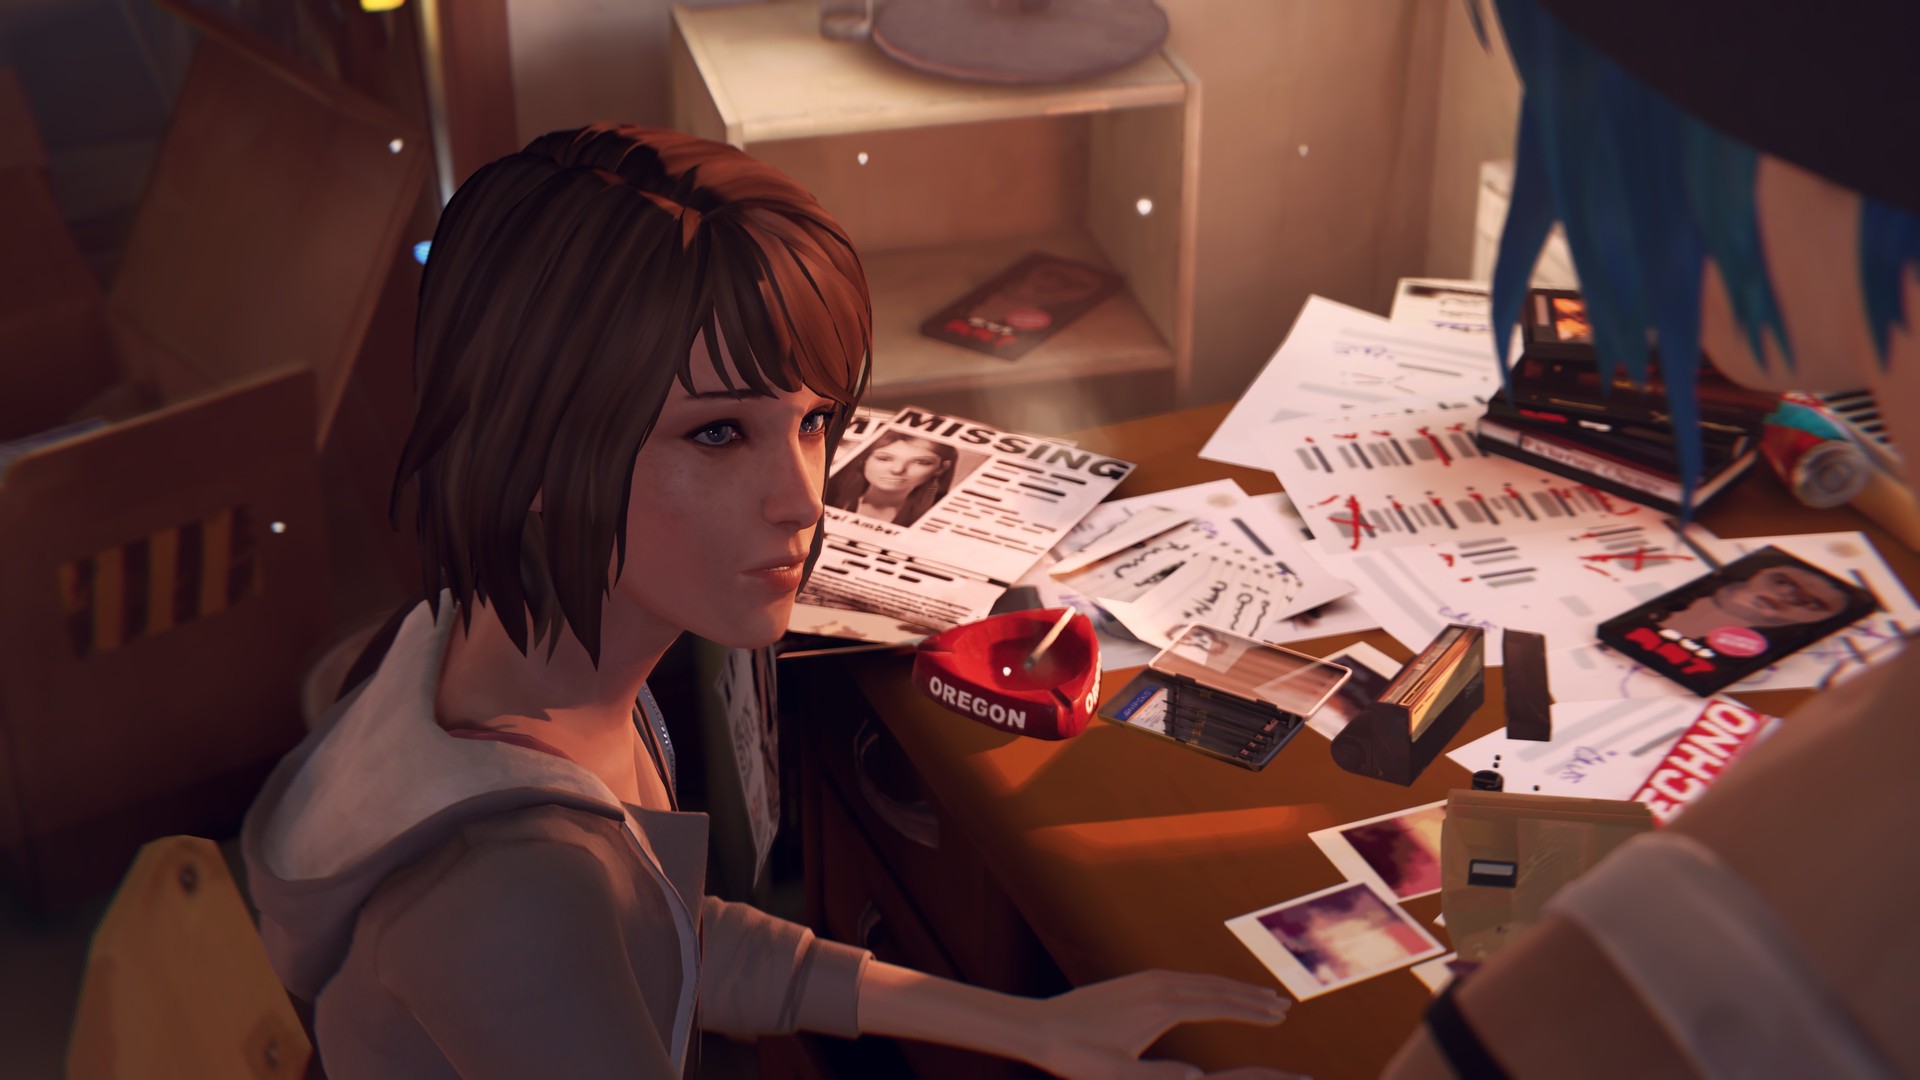 Life Is Strange Remastered Collection Steam CD Key